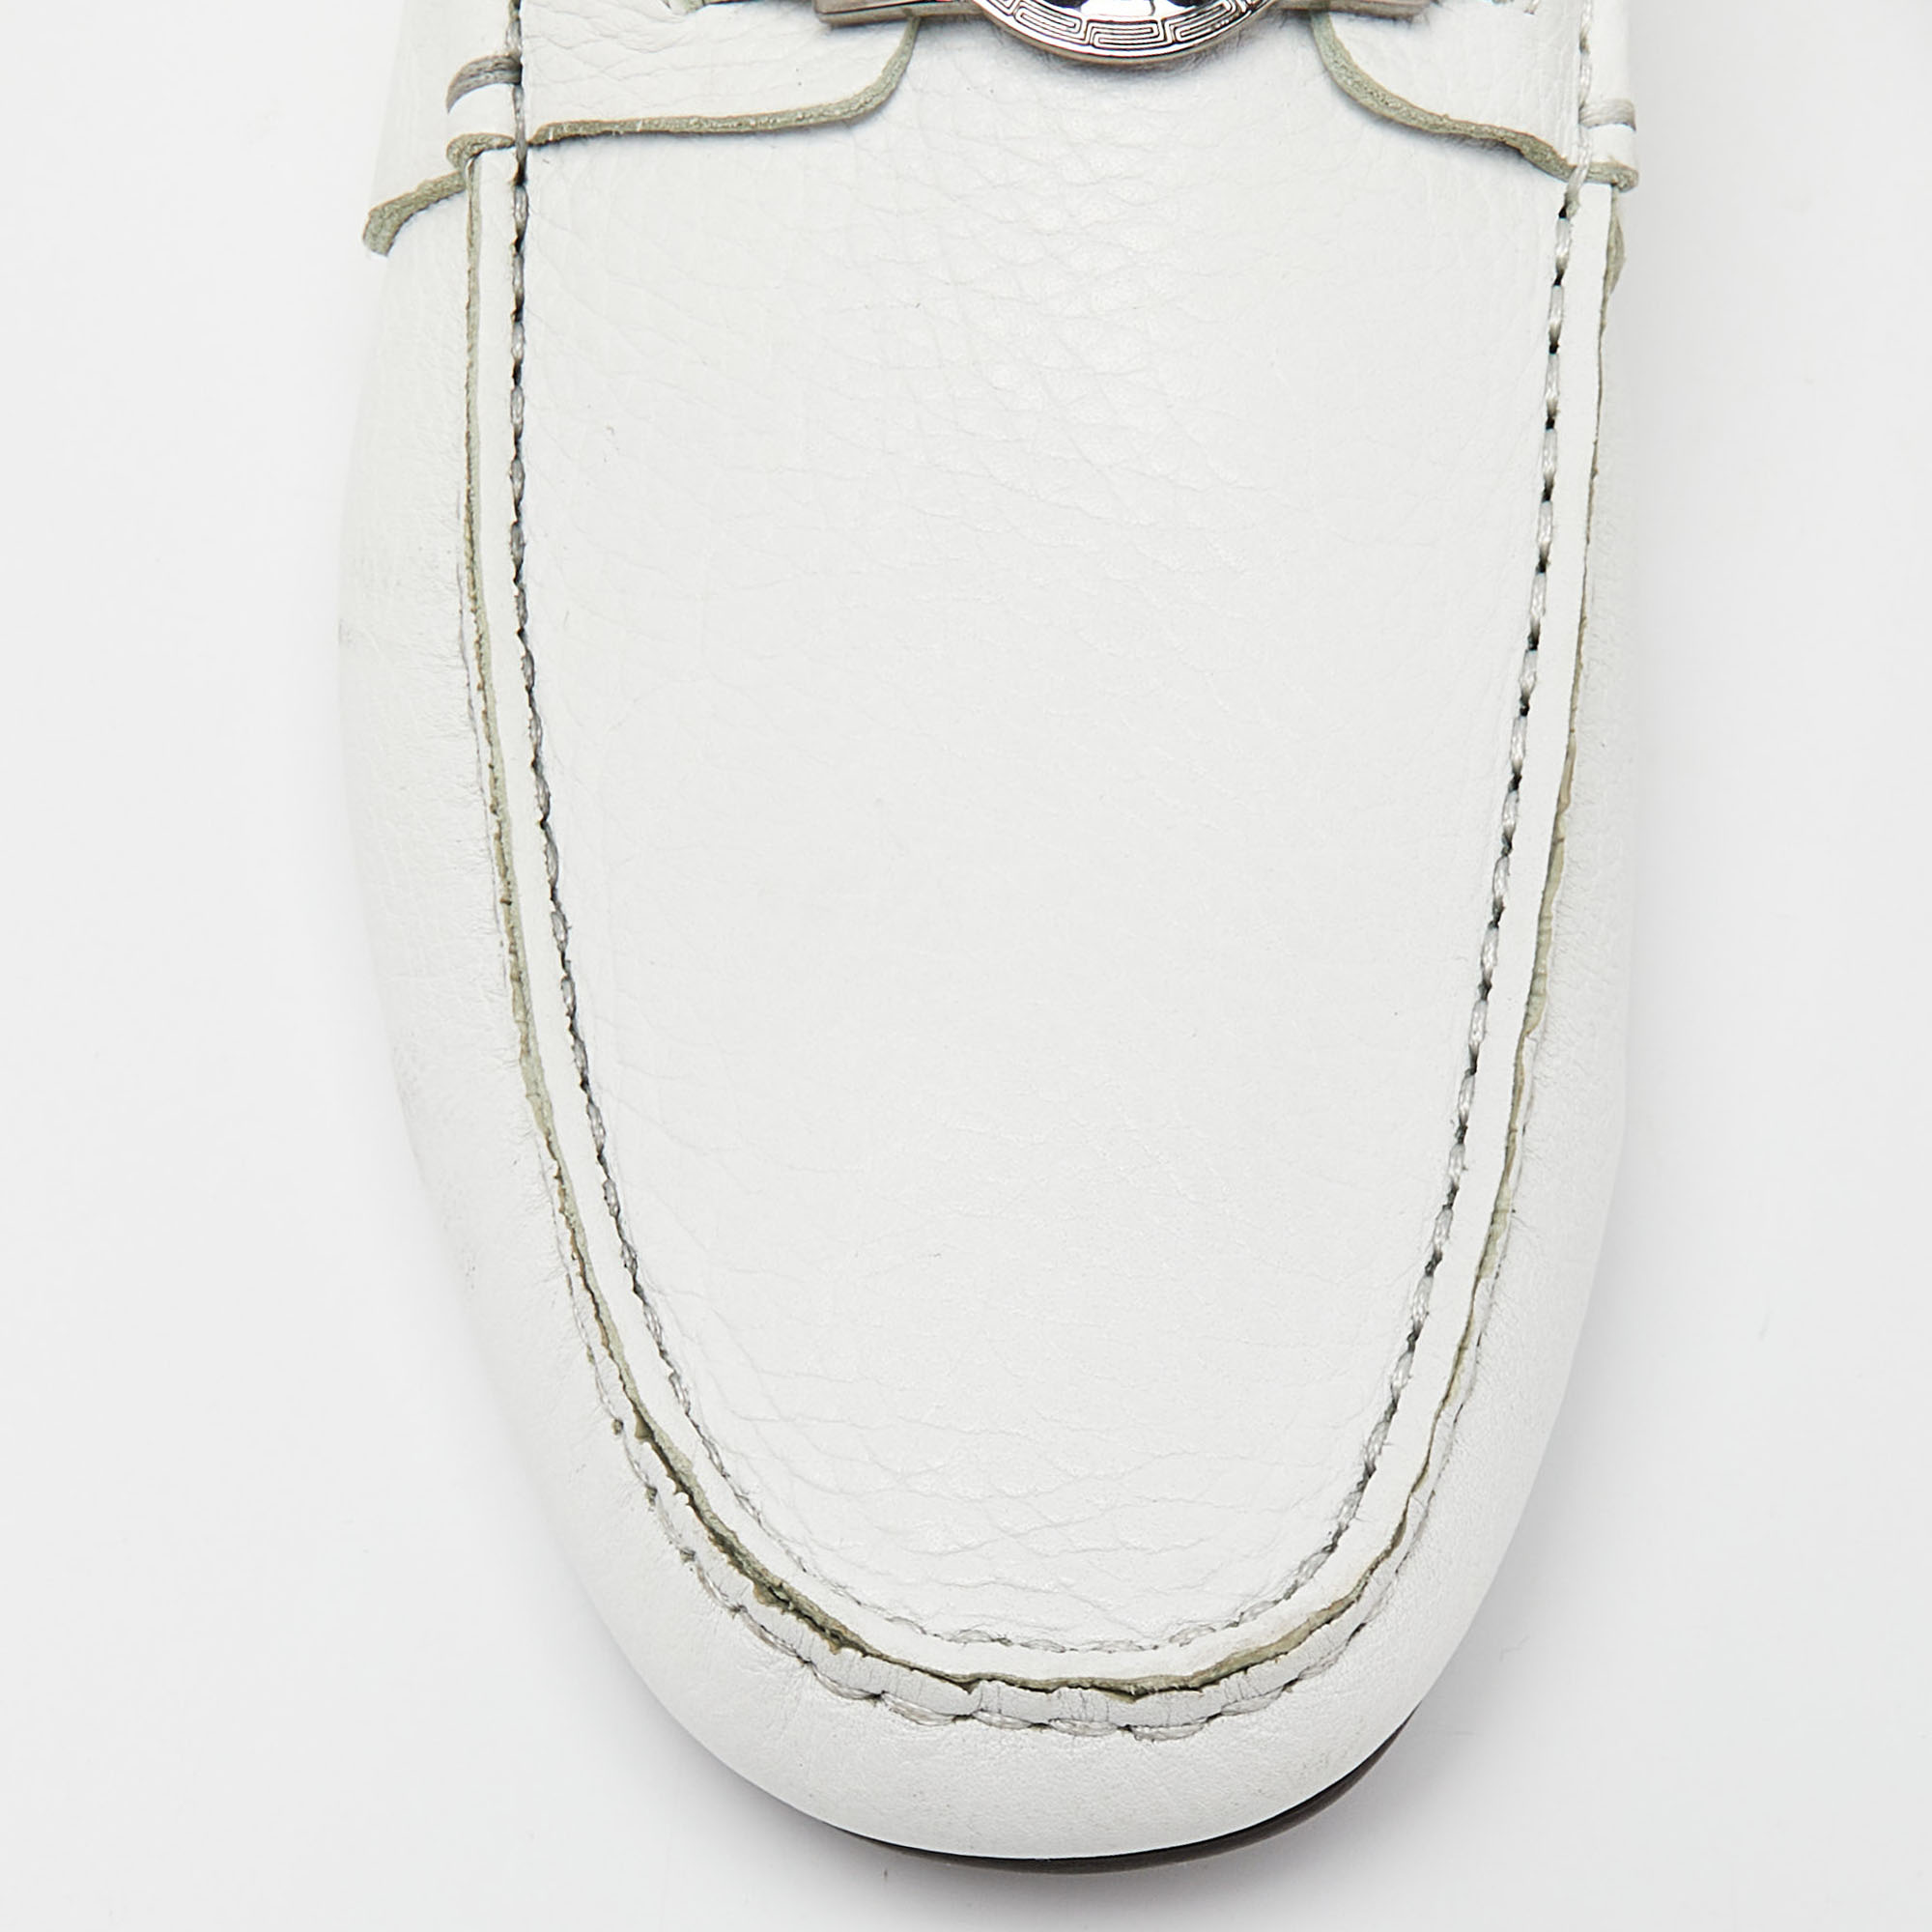 Versace White Leather Medusa Detail Slip On Loafers Size 43